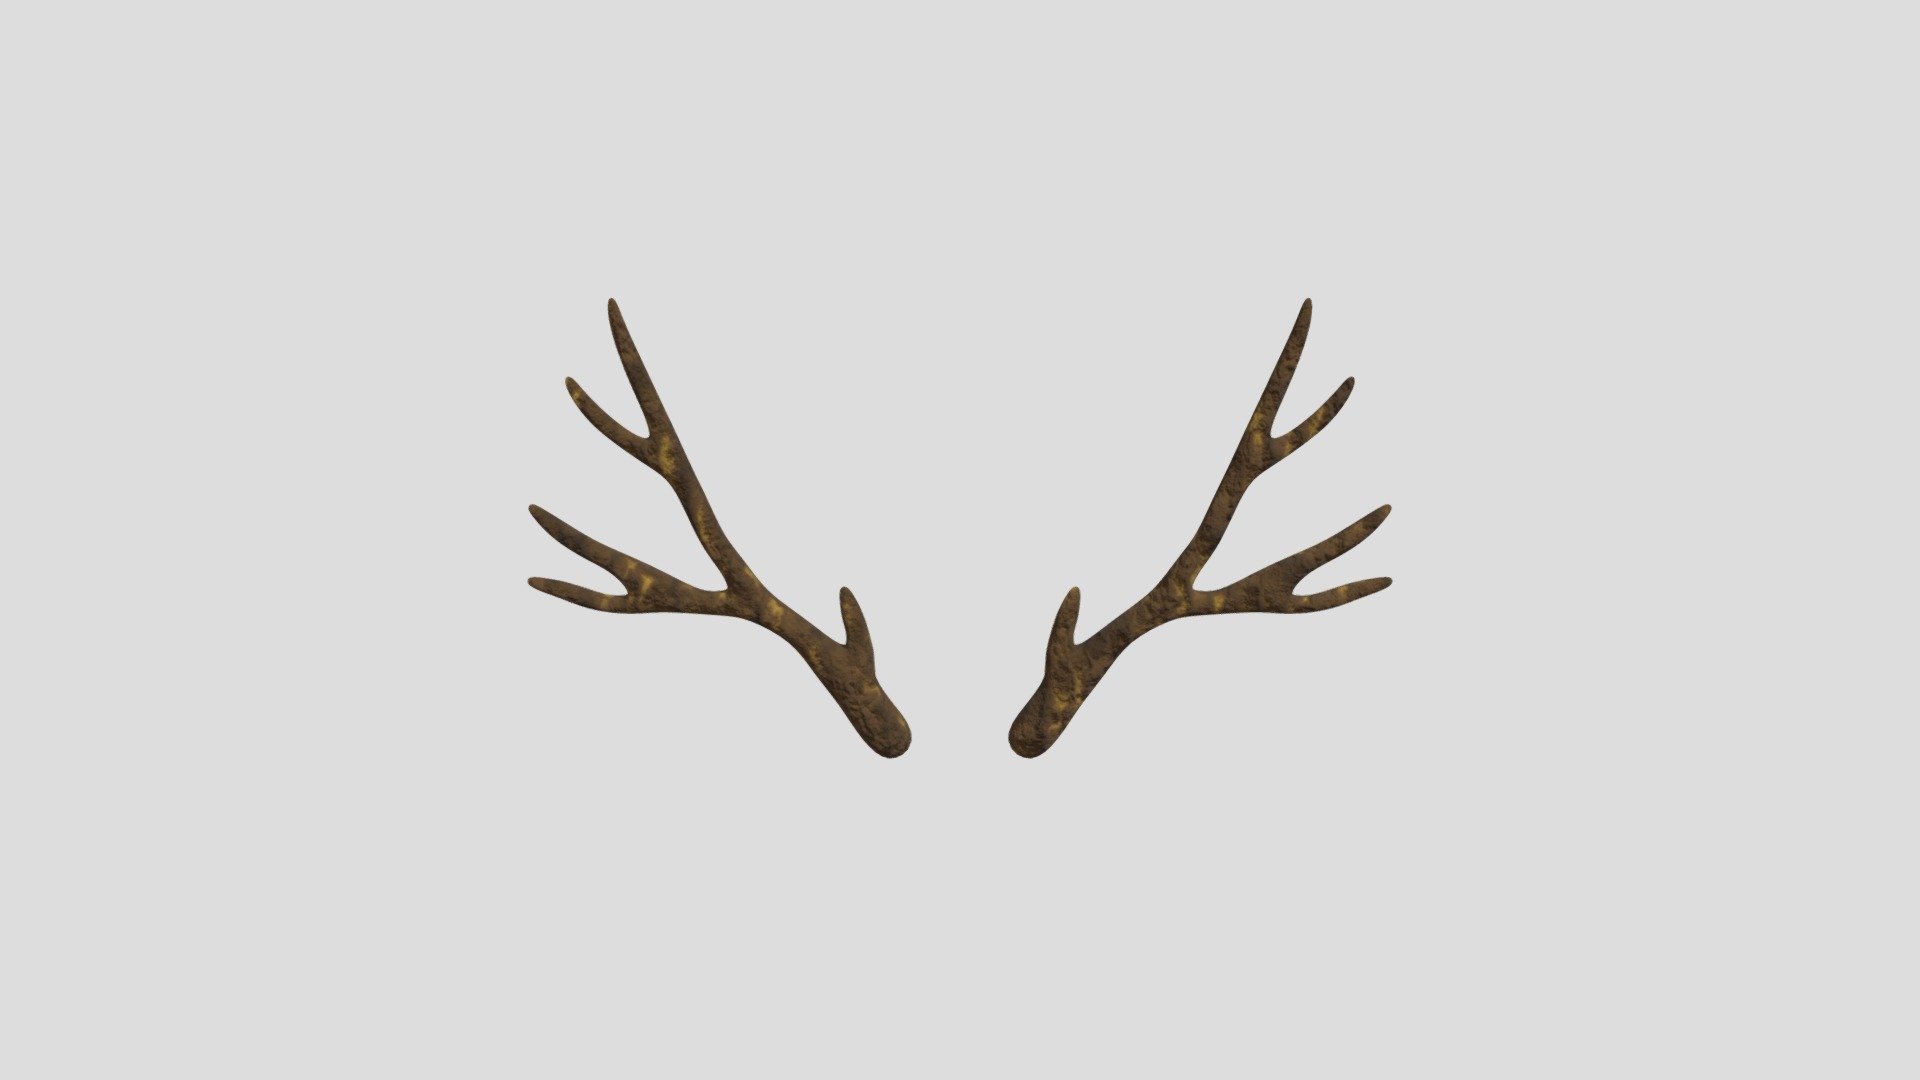 Reindeer or deer antlers for avatar.  Can be rezised to be smaller.  Meant to come out the top of the head, not out the sides like moose antlers.  Created in Blender 3d model